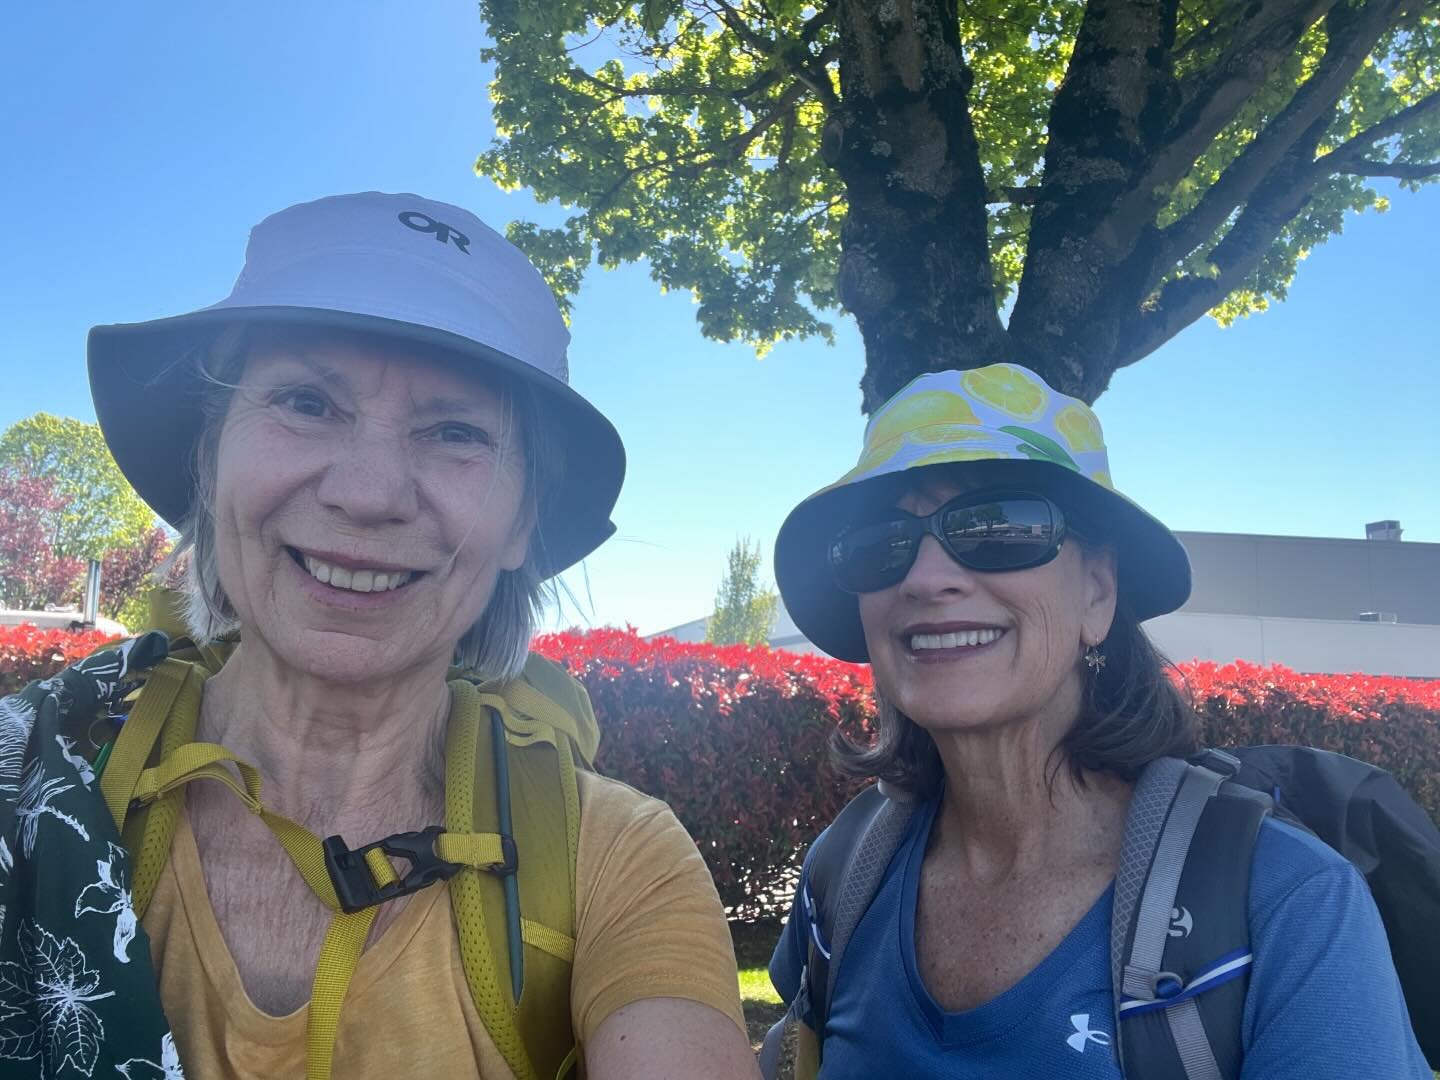 ICF member Teresa and her friend Yvonne will be completing the El Camino de Santiago hike which is 800km (500 miles). They are headed to Paris today, then will be taking a train down to Saint Jean-Pied-de-Port for the night and starting their trek ov